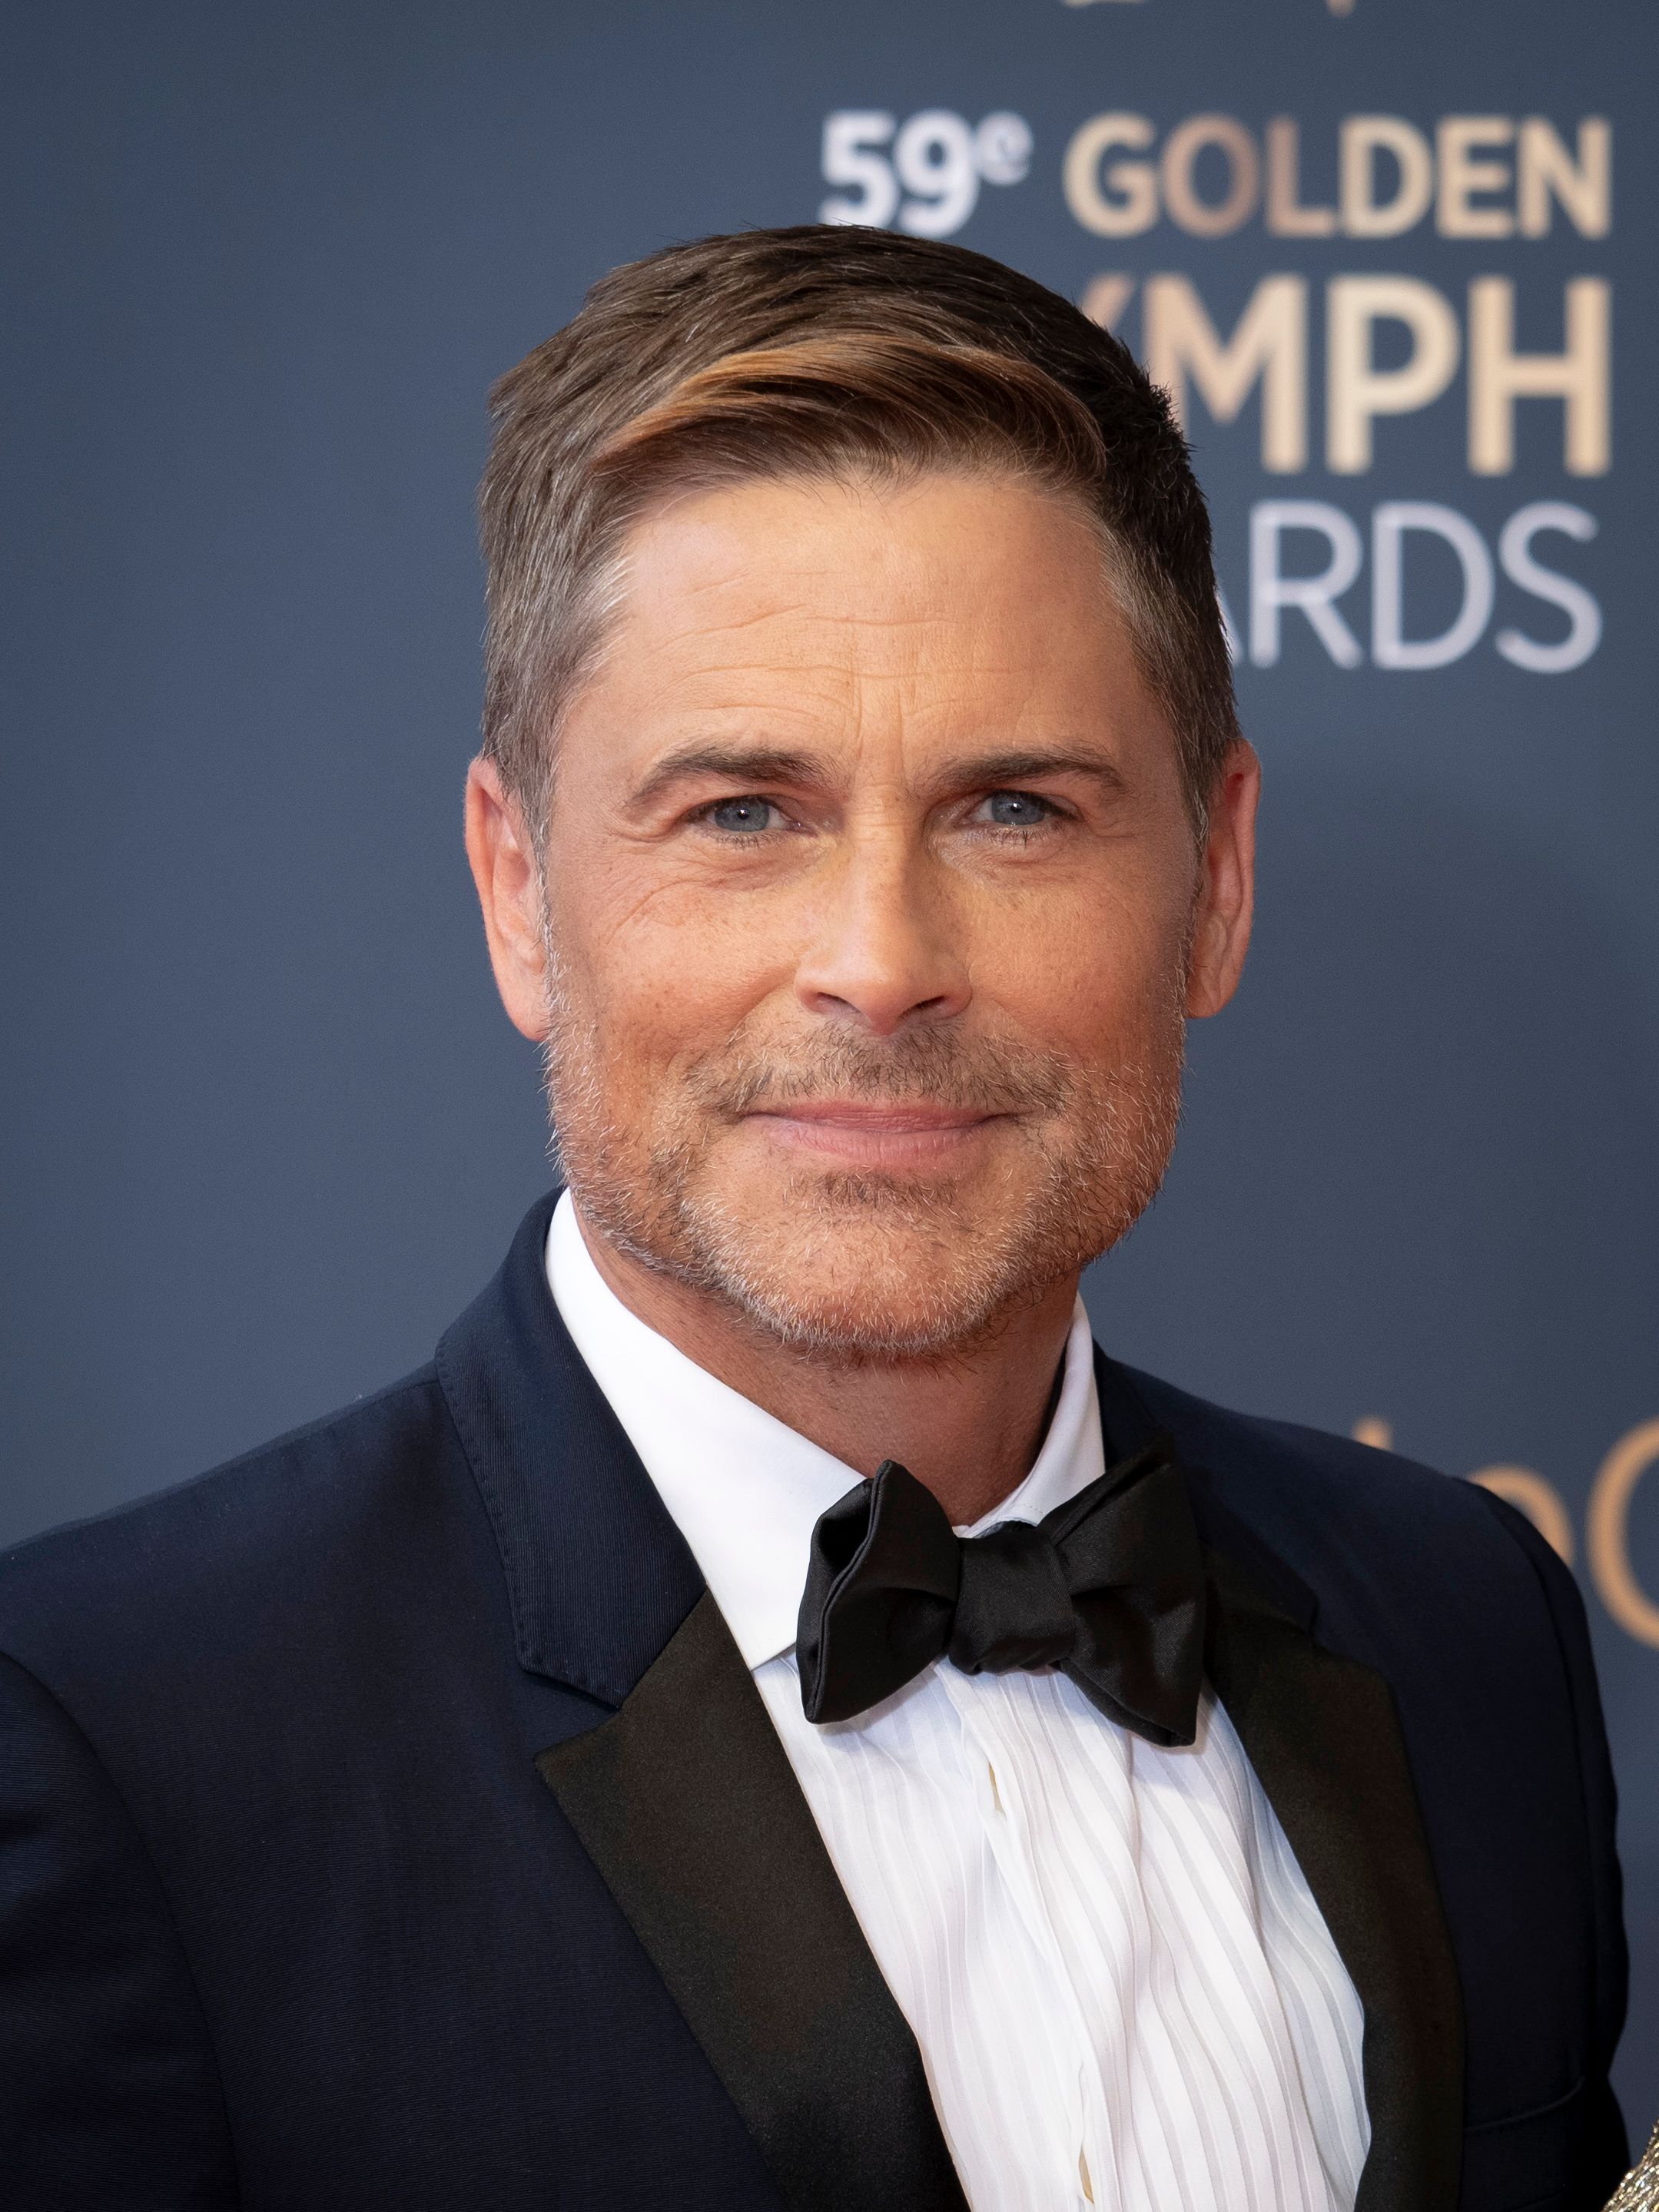 Rob Lowe during the closing ceremony of the 59th Monte Carlo TV Festival on June 18, 2019, in Monte-Carlo, Monaco. | Source: Getty Images